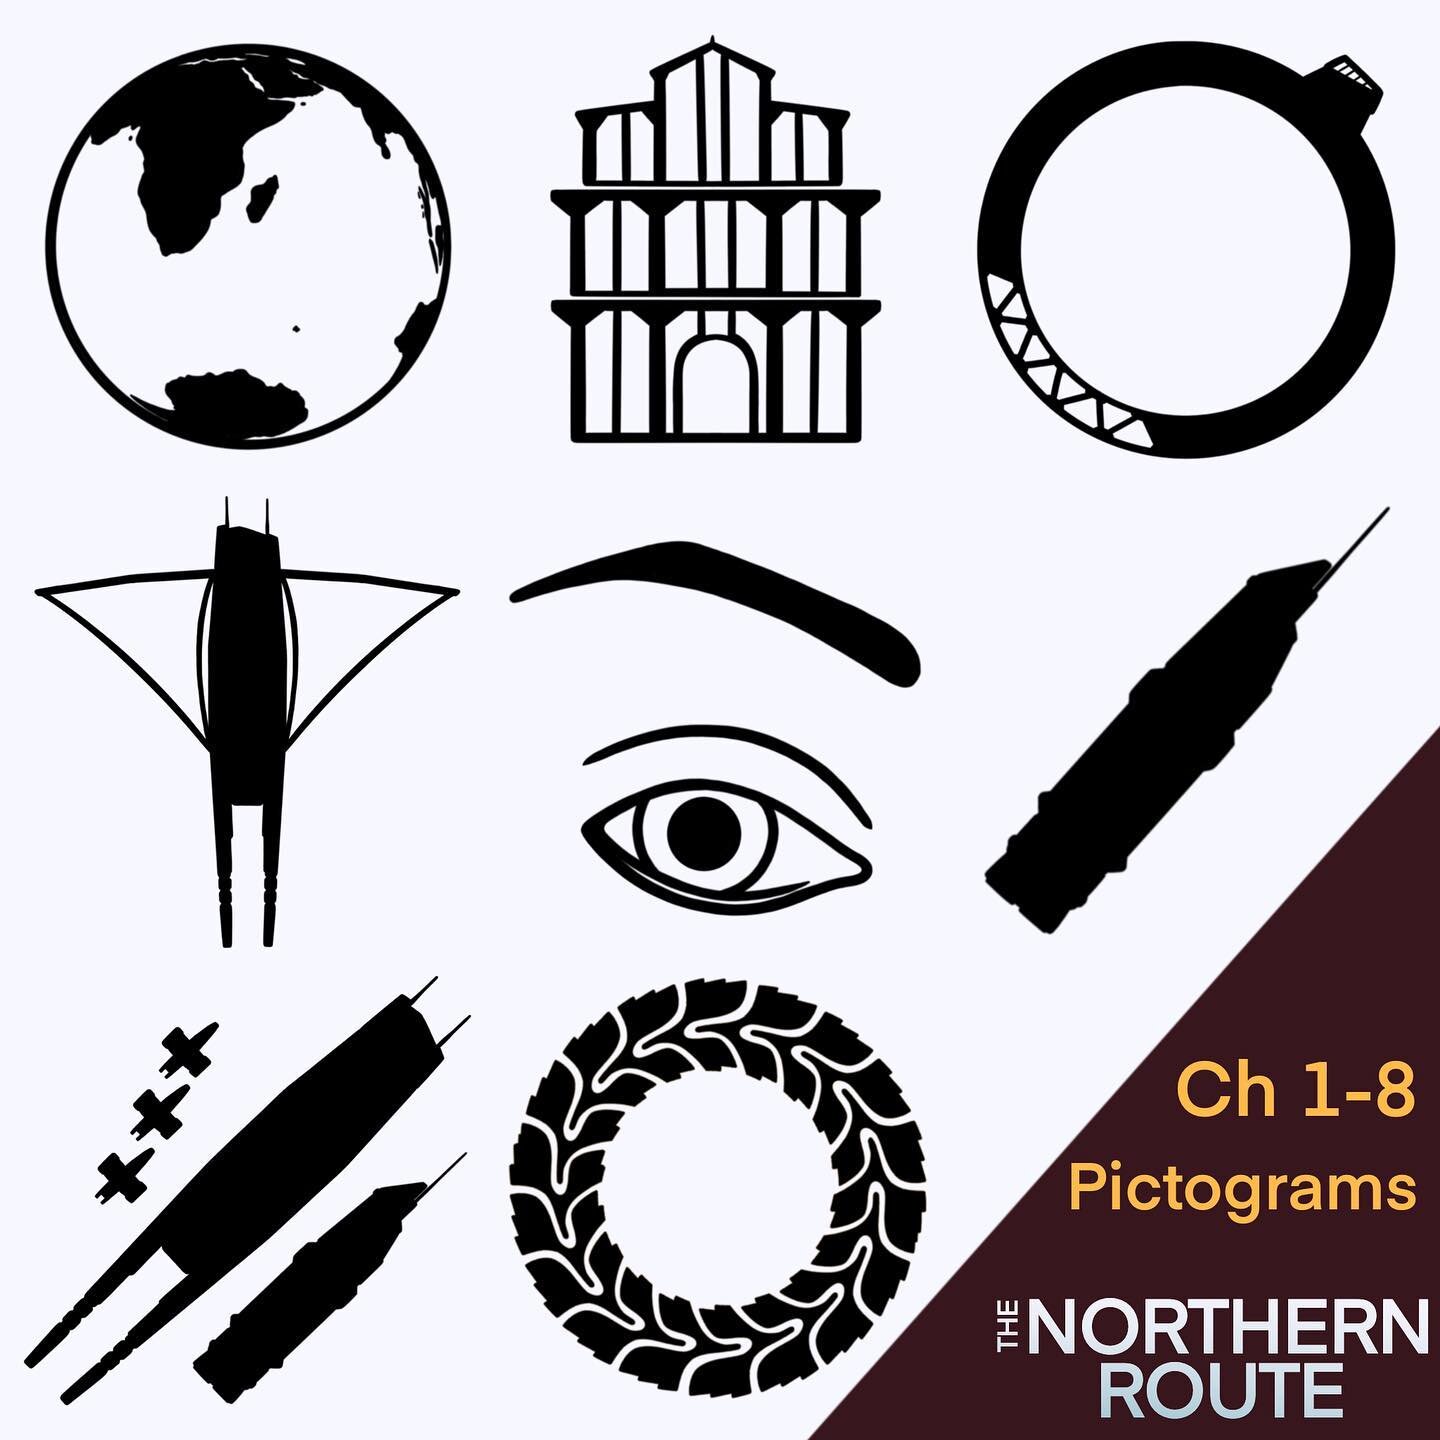 Every chapter in the Northern Route is headed by a pictogram! Here are the first few, including a handful of ship silhouettes.

#scifi #scifinovel #scifinovels #scifibook #scifibooks